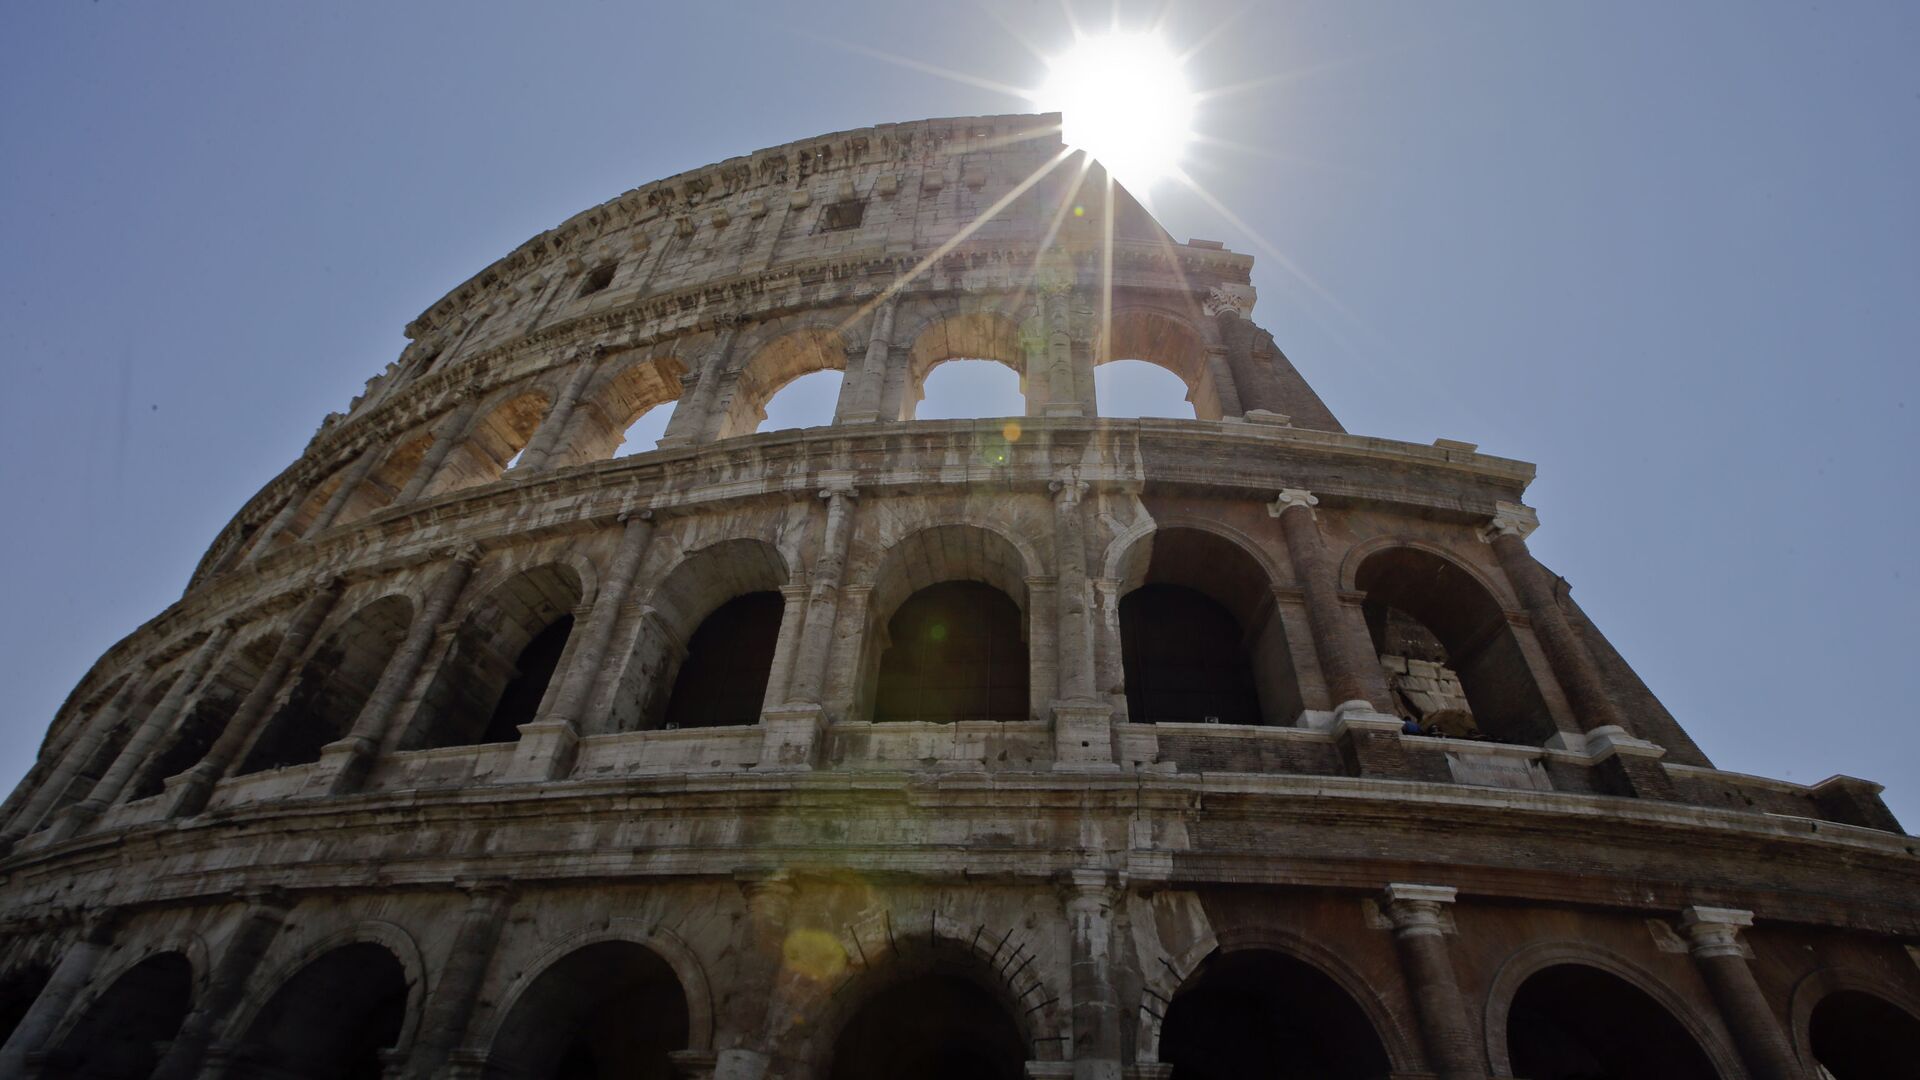 A view of the Colosseum after the first stage of the restoration work was completed in Rome, Friday, July 1st, 2016. The Colosseum has emerged more imposing than ever after its most extensive restoration, a multi-million-euro cleaning to remove a dreary, undignified patina of soot and grime from the ancient arena, assailed by pollution in traffic-clogged Rome. (AP Photo/Andrew Medichini) - Sputnik International, 1920, 03.10.2021